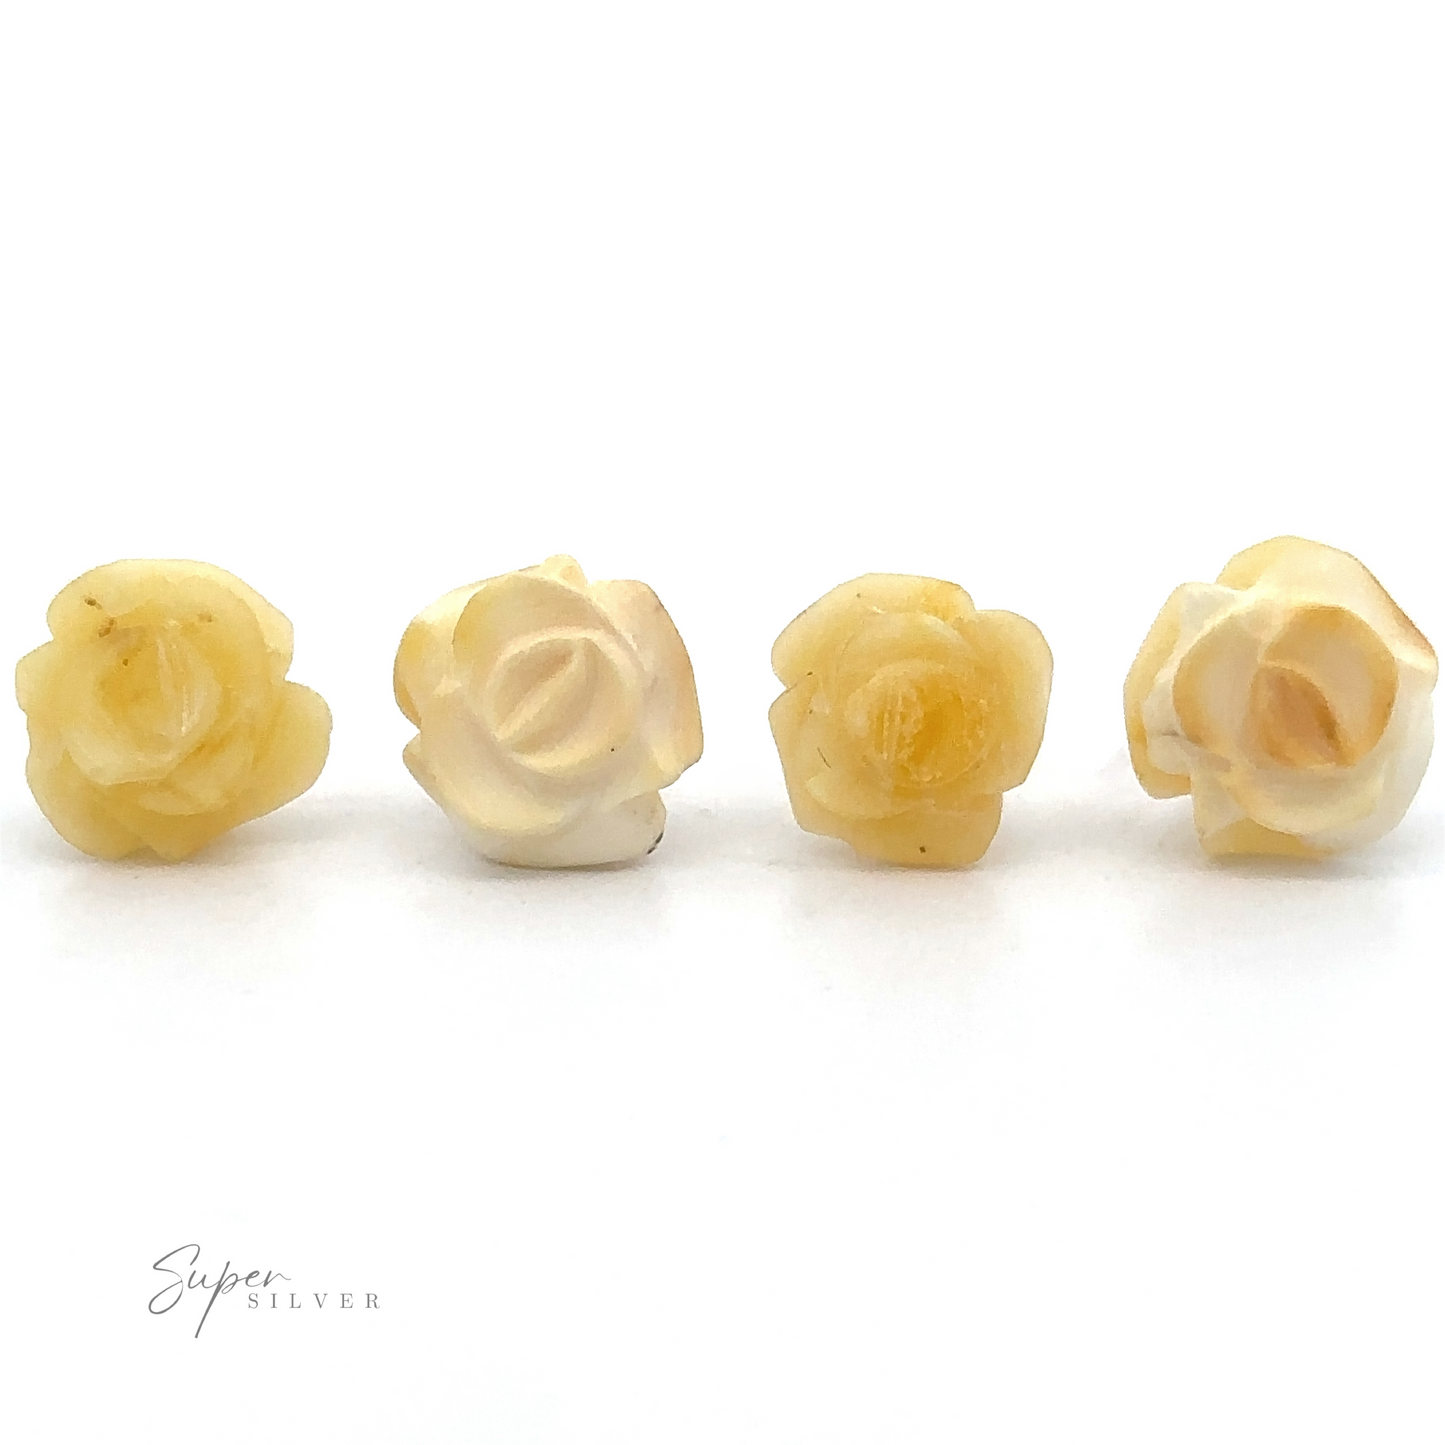 
                  
                    Four small, yellowish-white carved flower beads are arranged in a row on a white background. The image features a logo in the bottom left corner that reads "Super Silver." These delicate Butterscotch Amber Rose Studs bring to mind butterscotch amber jewelry's unique charm.
                  
                